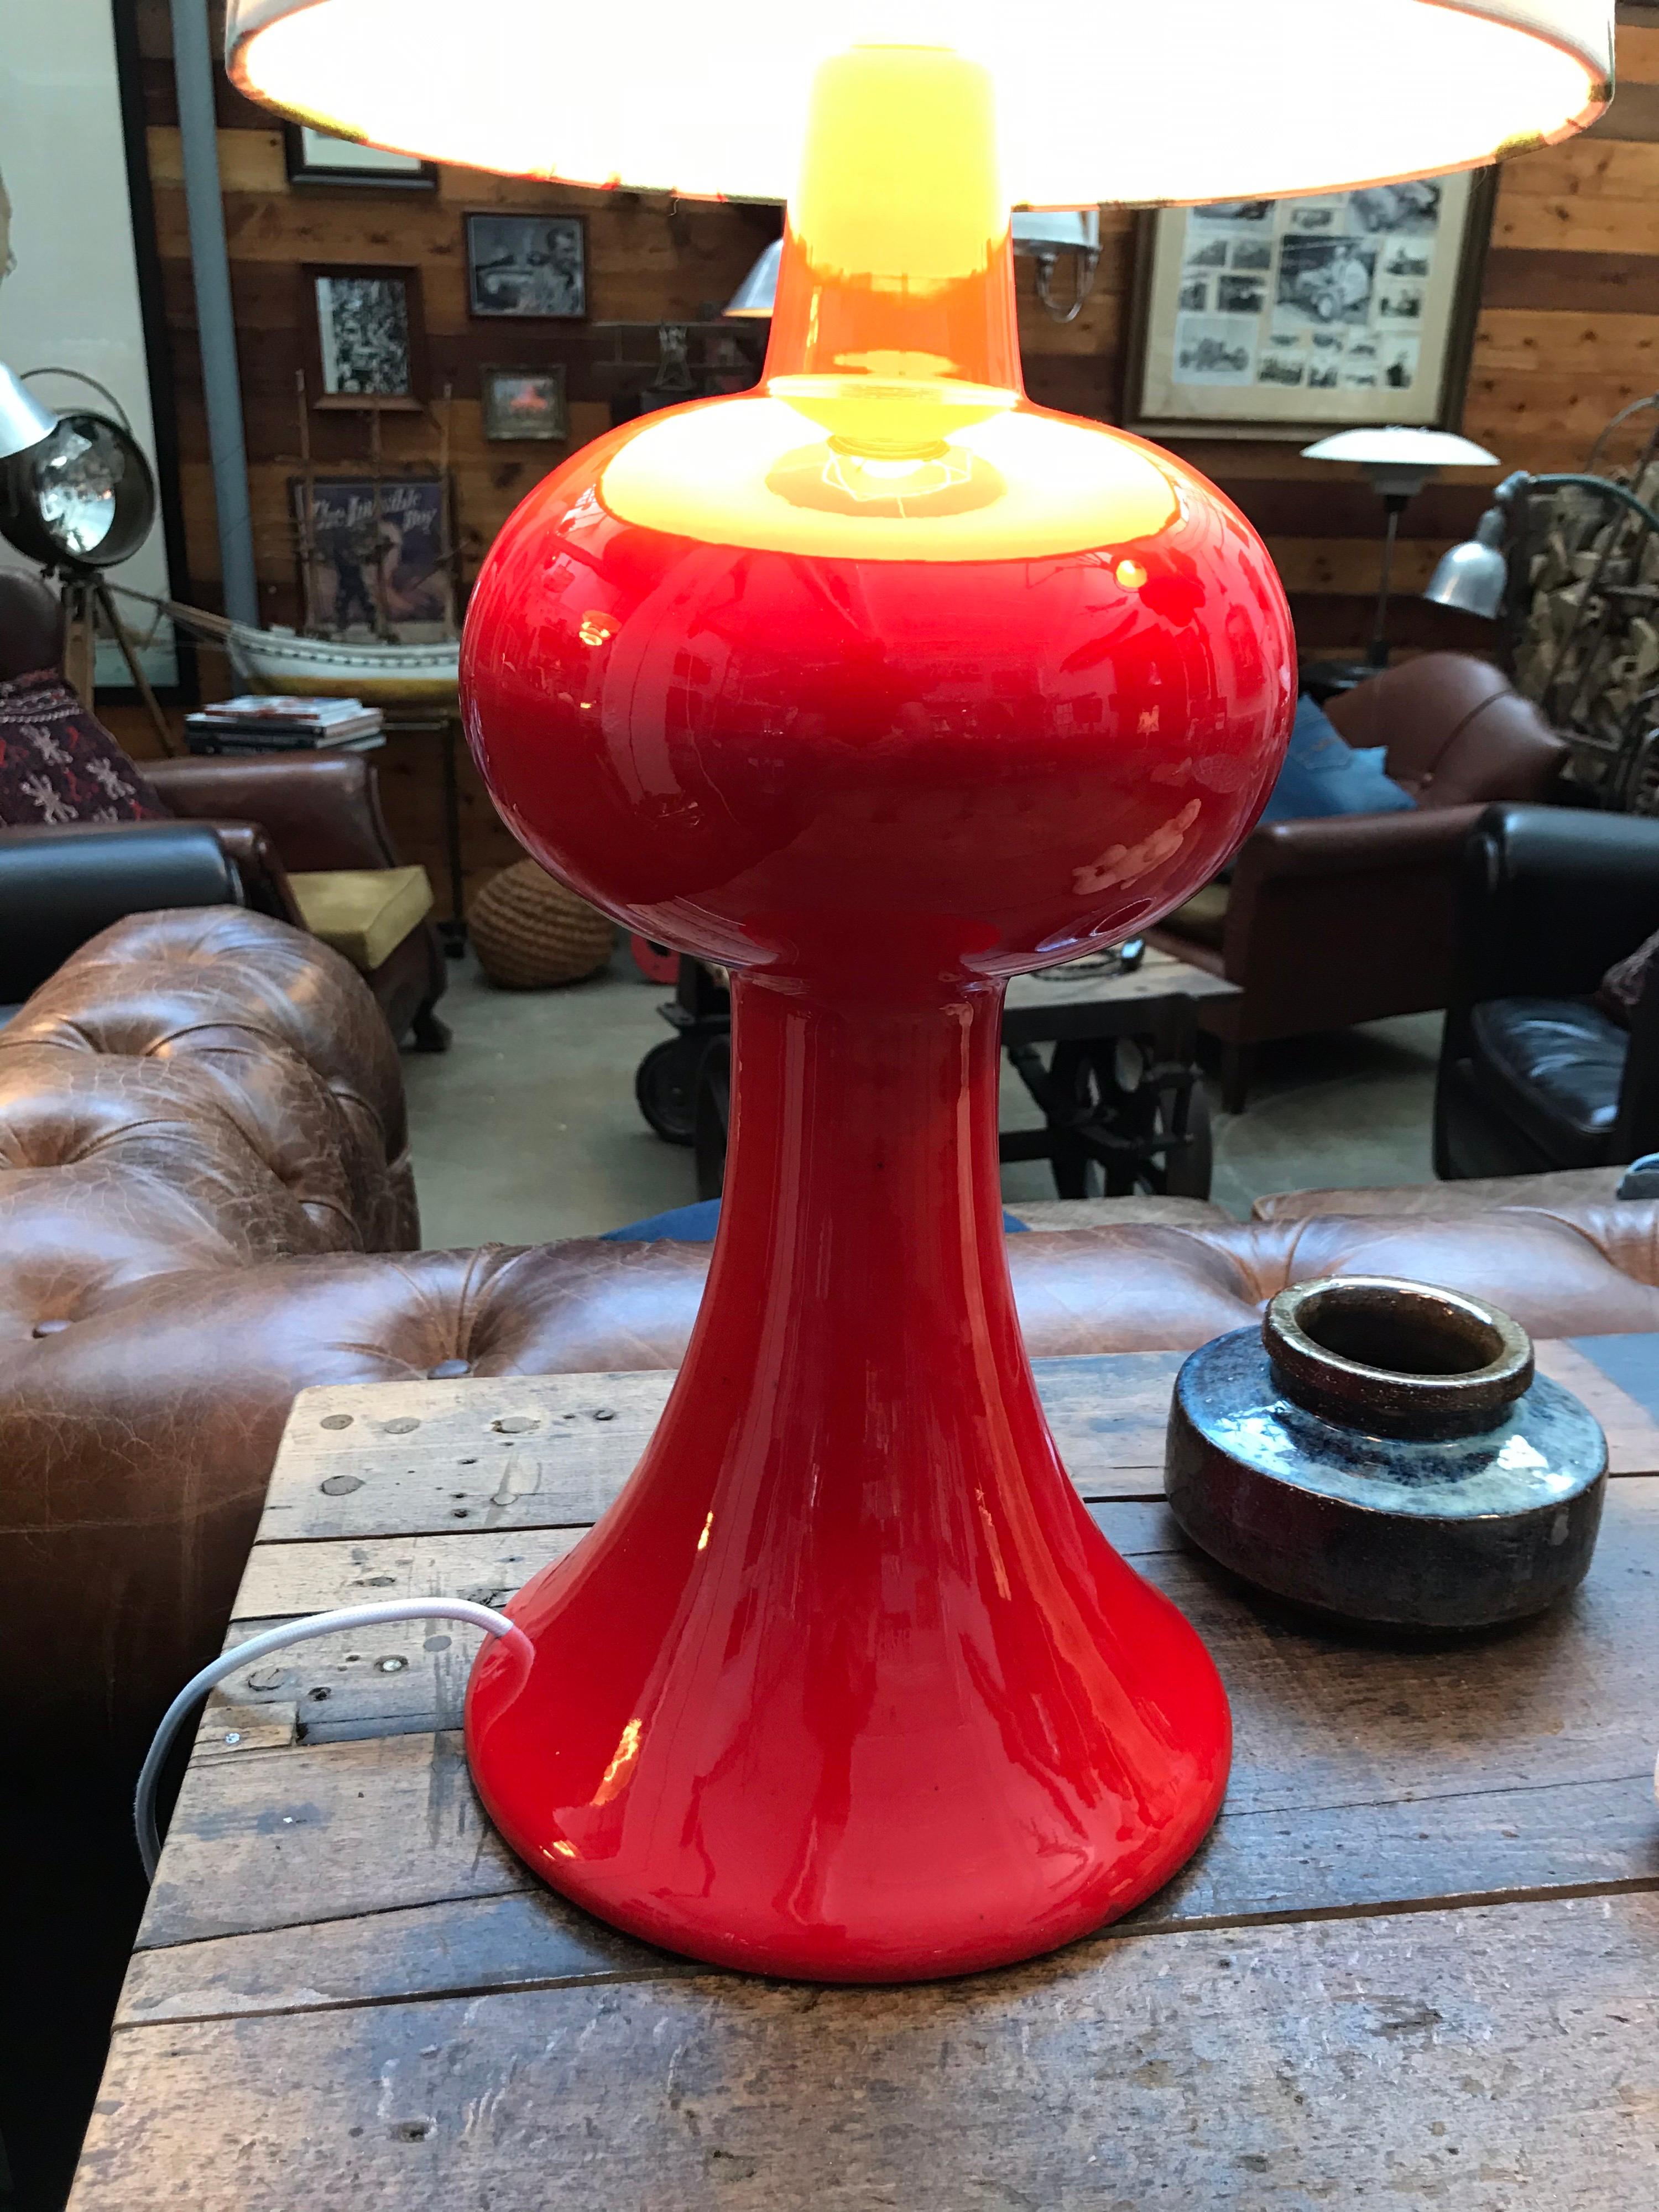 Mid-Century Modern Danish Vintage Retro Porcelain Table Lamp from the 1960s For Sale